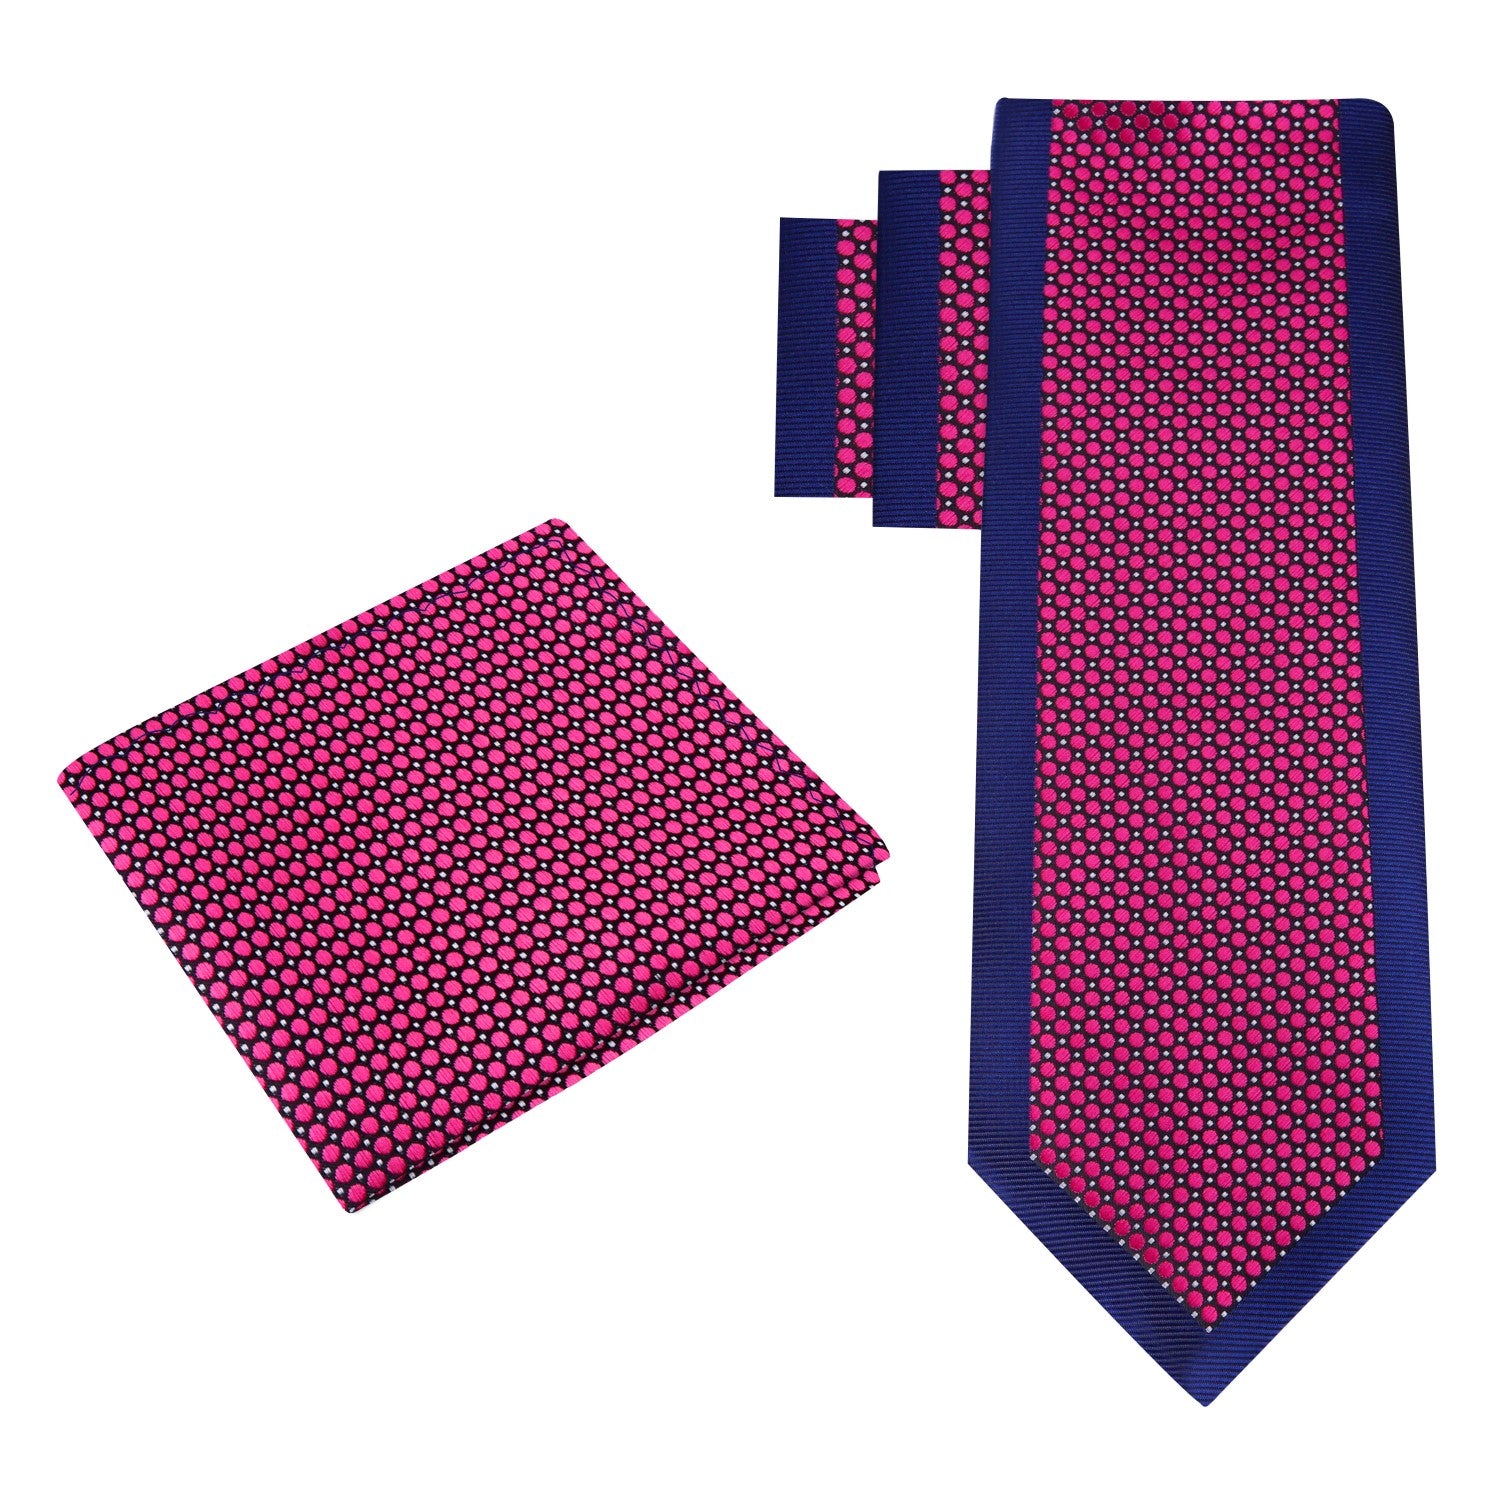 Alt View: Blue, Red Geometric Tie and Pocket Square